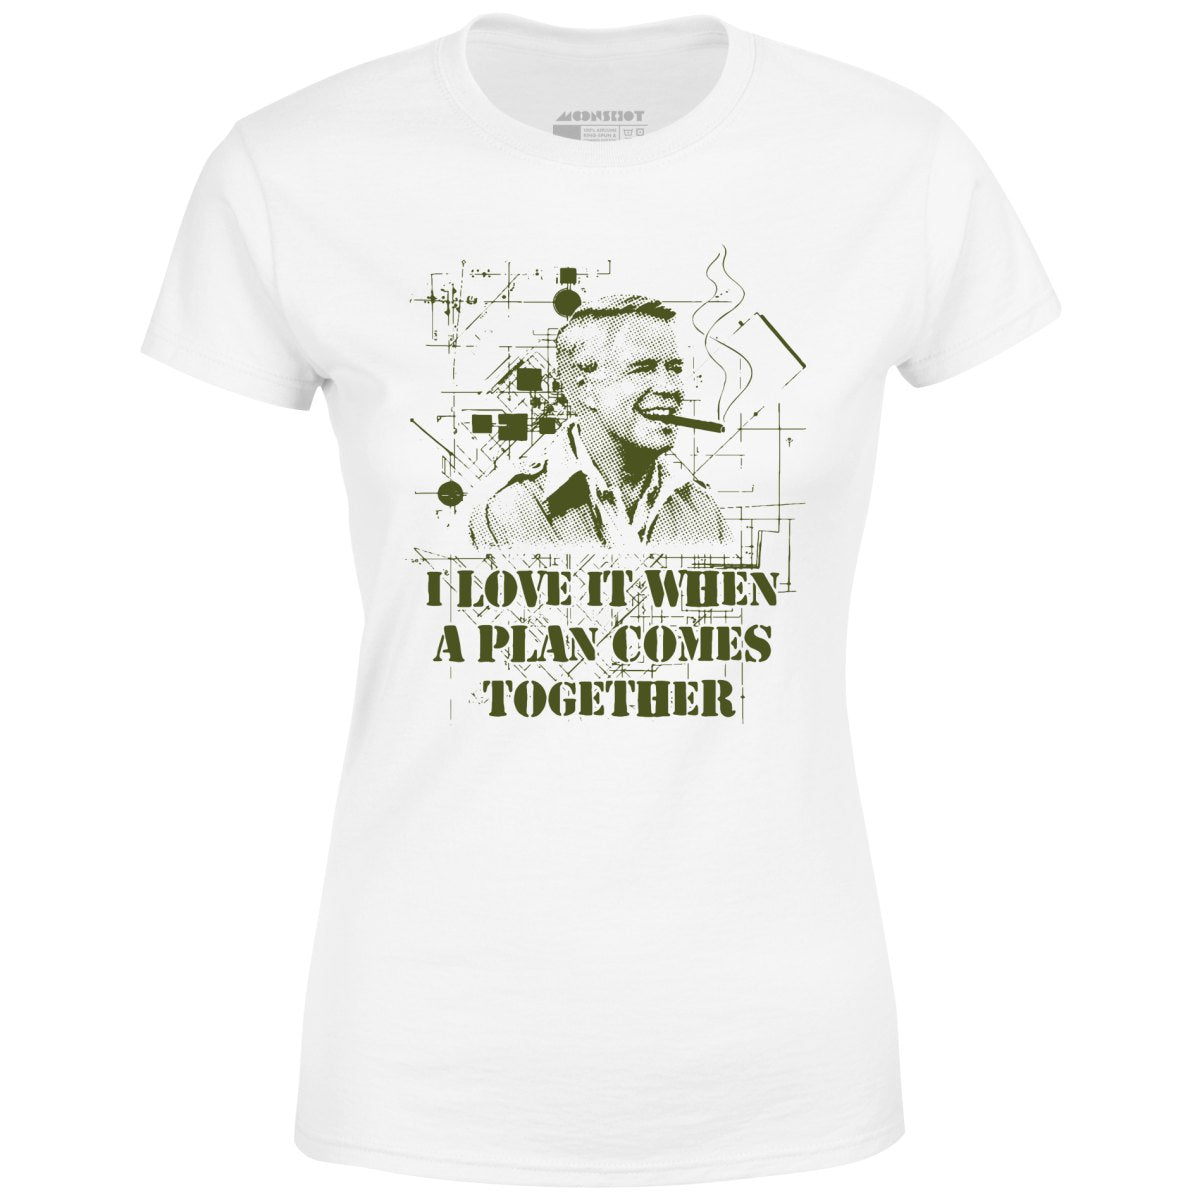 I Love it When a Plan Comes Together - Women's T-Shirt